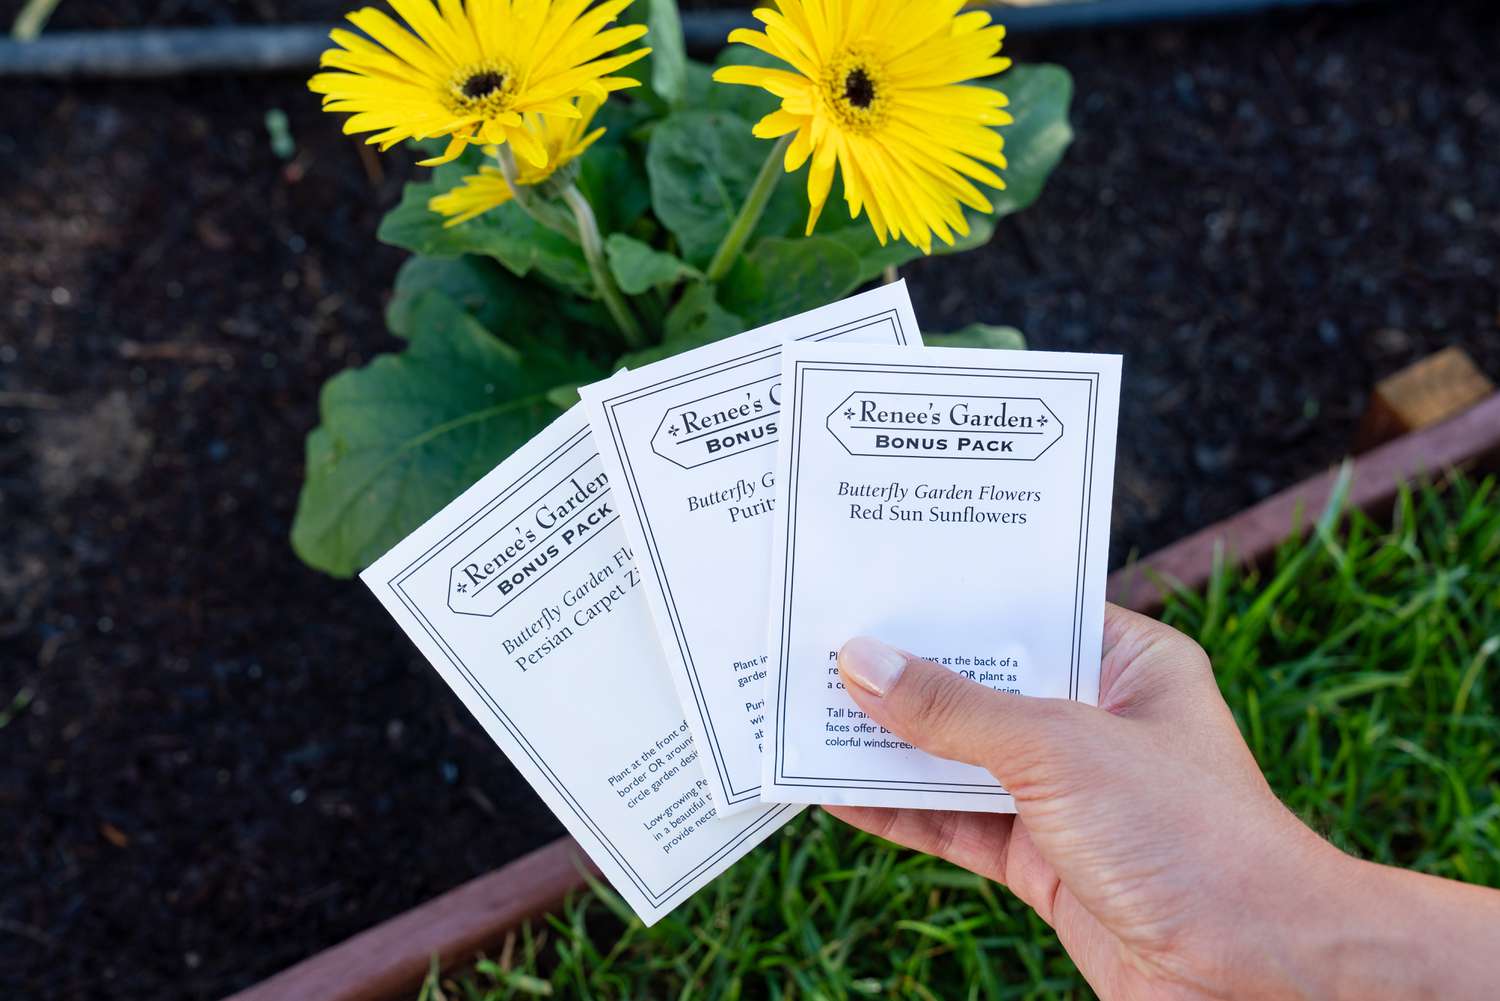 Catalogue seed packet held in hand over yellow flowers